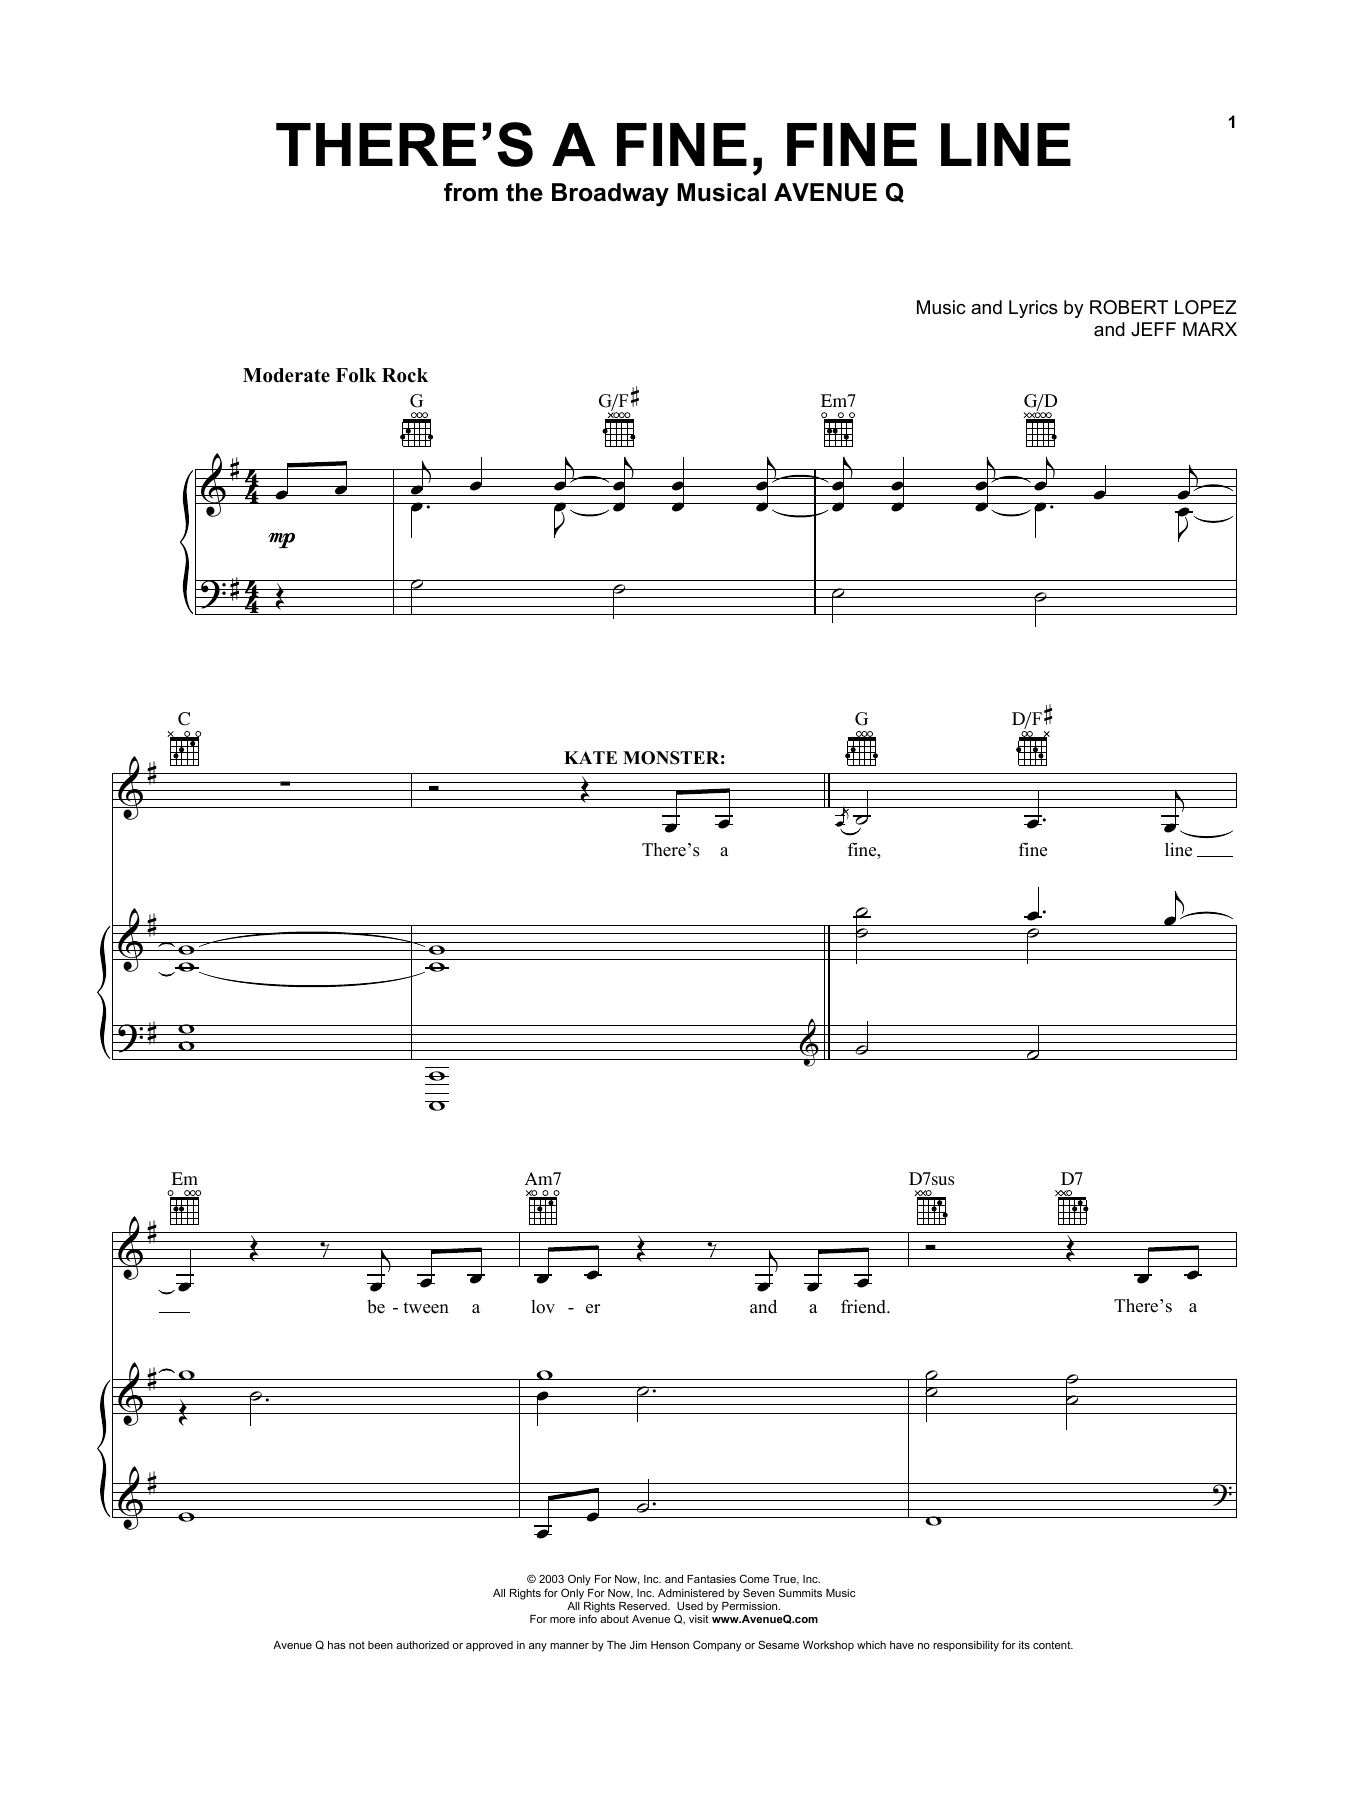 Download Jeff Marx and Robert Lopez There's A Fine, Fine Line (from Avenue Sheet Music